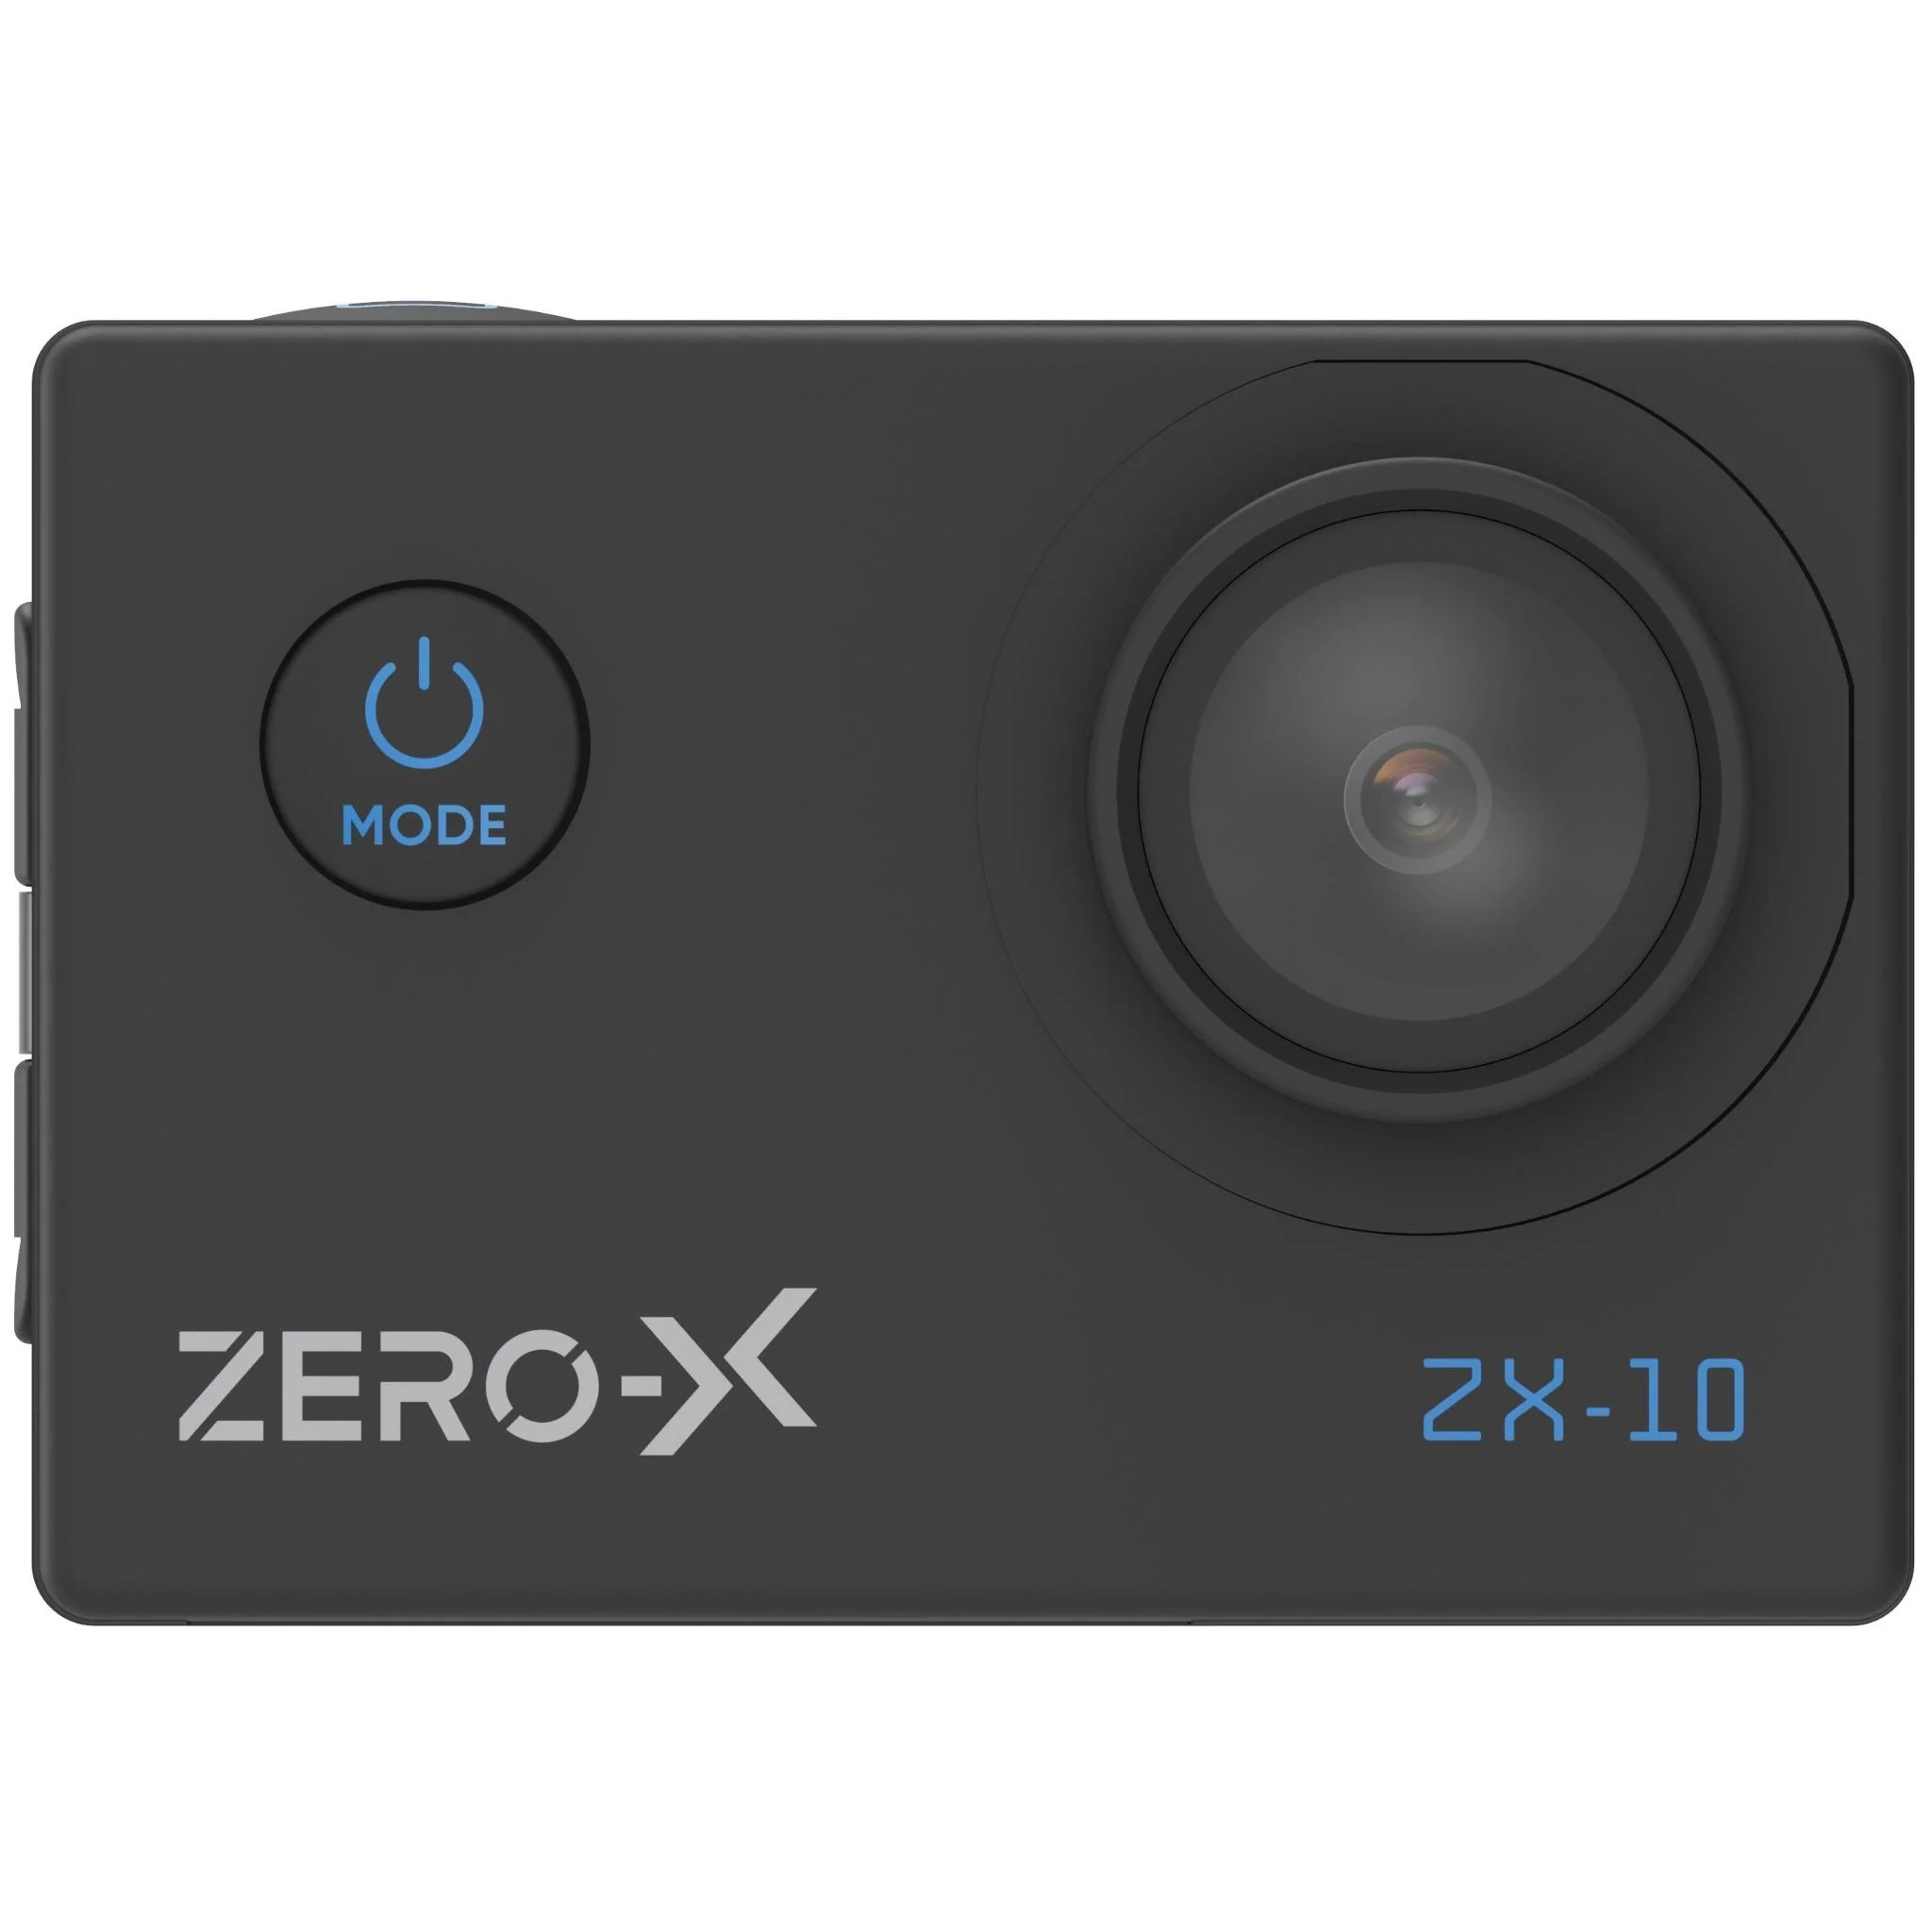 Zero-X ZX-10 Full HD Action Camera With 2.0" LCD Screen